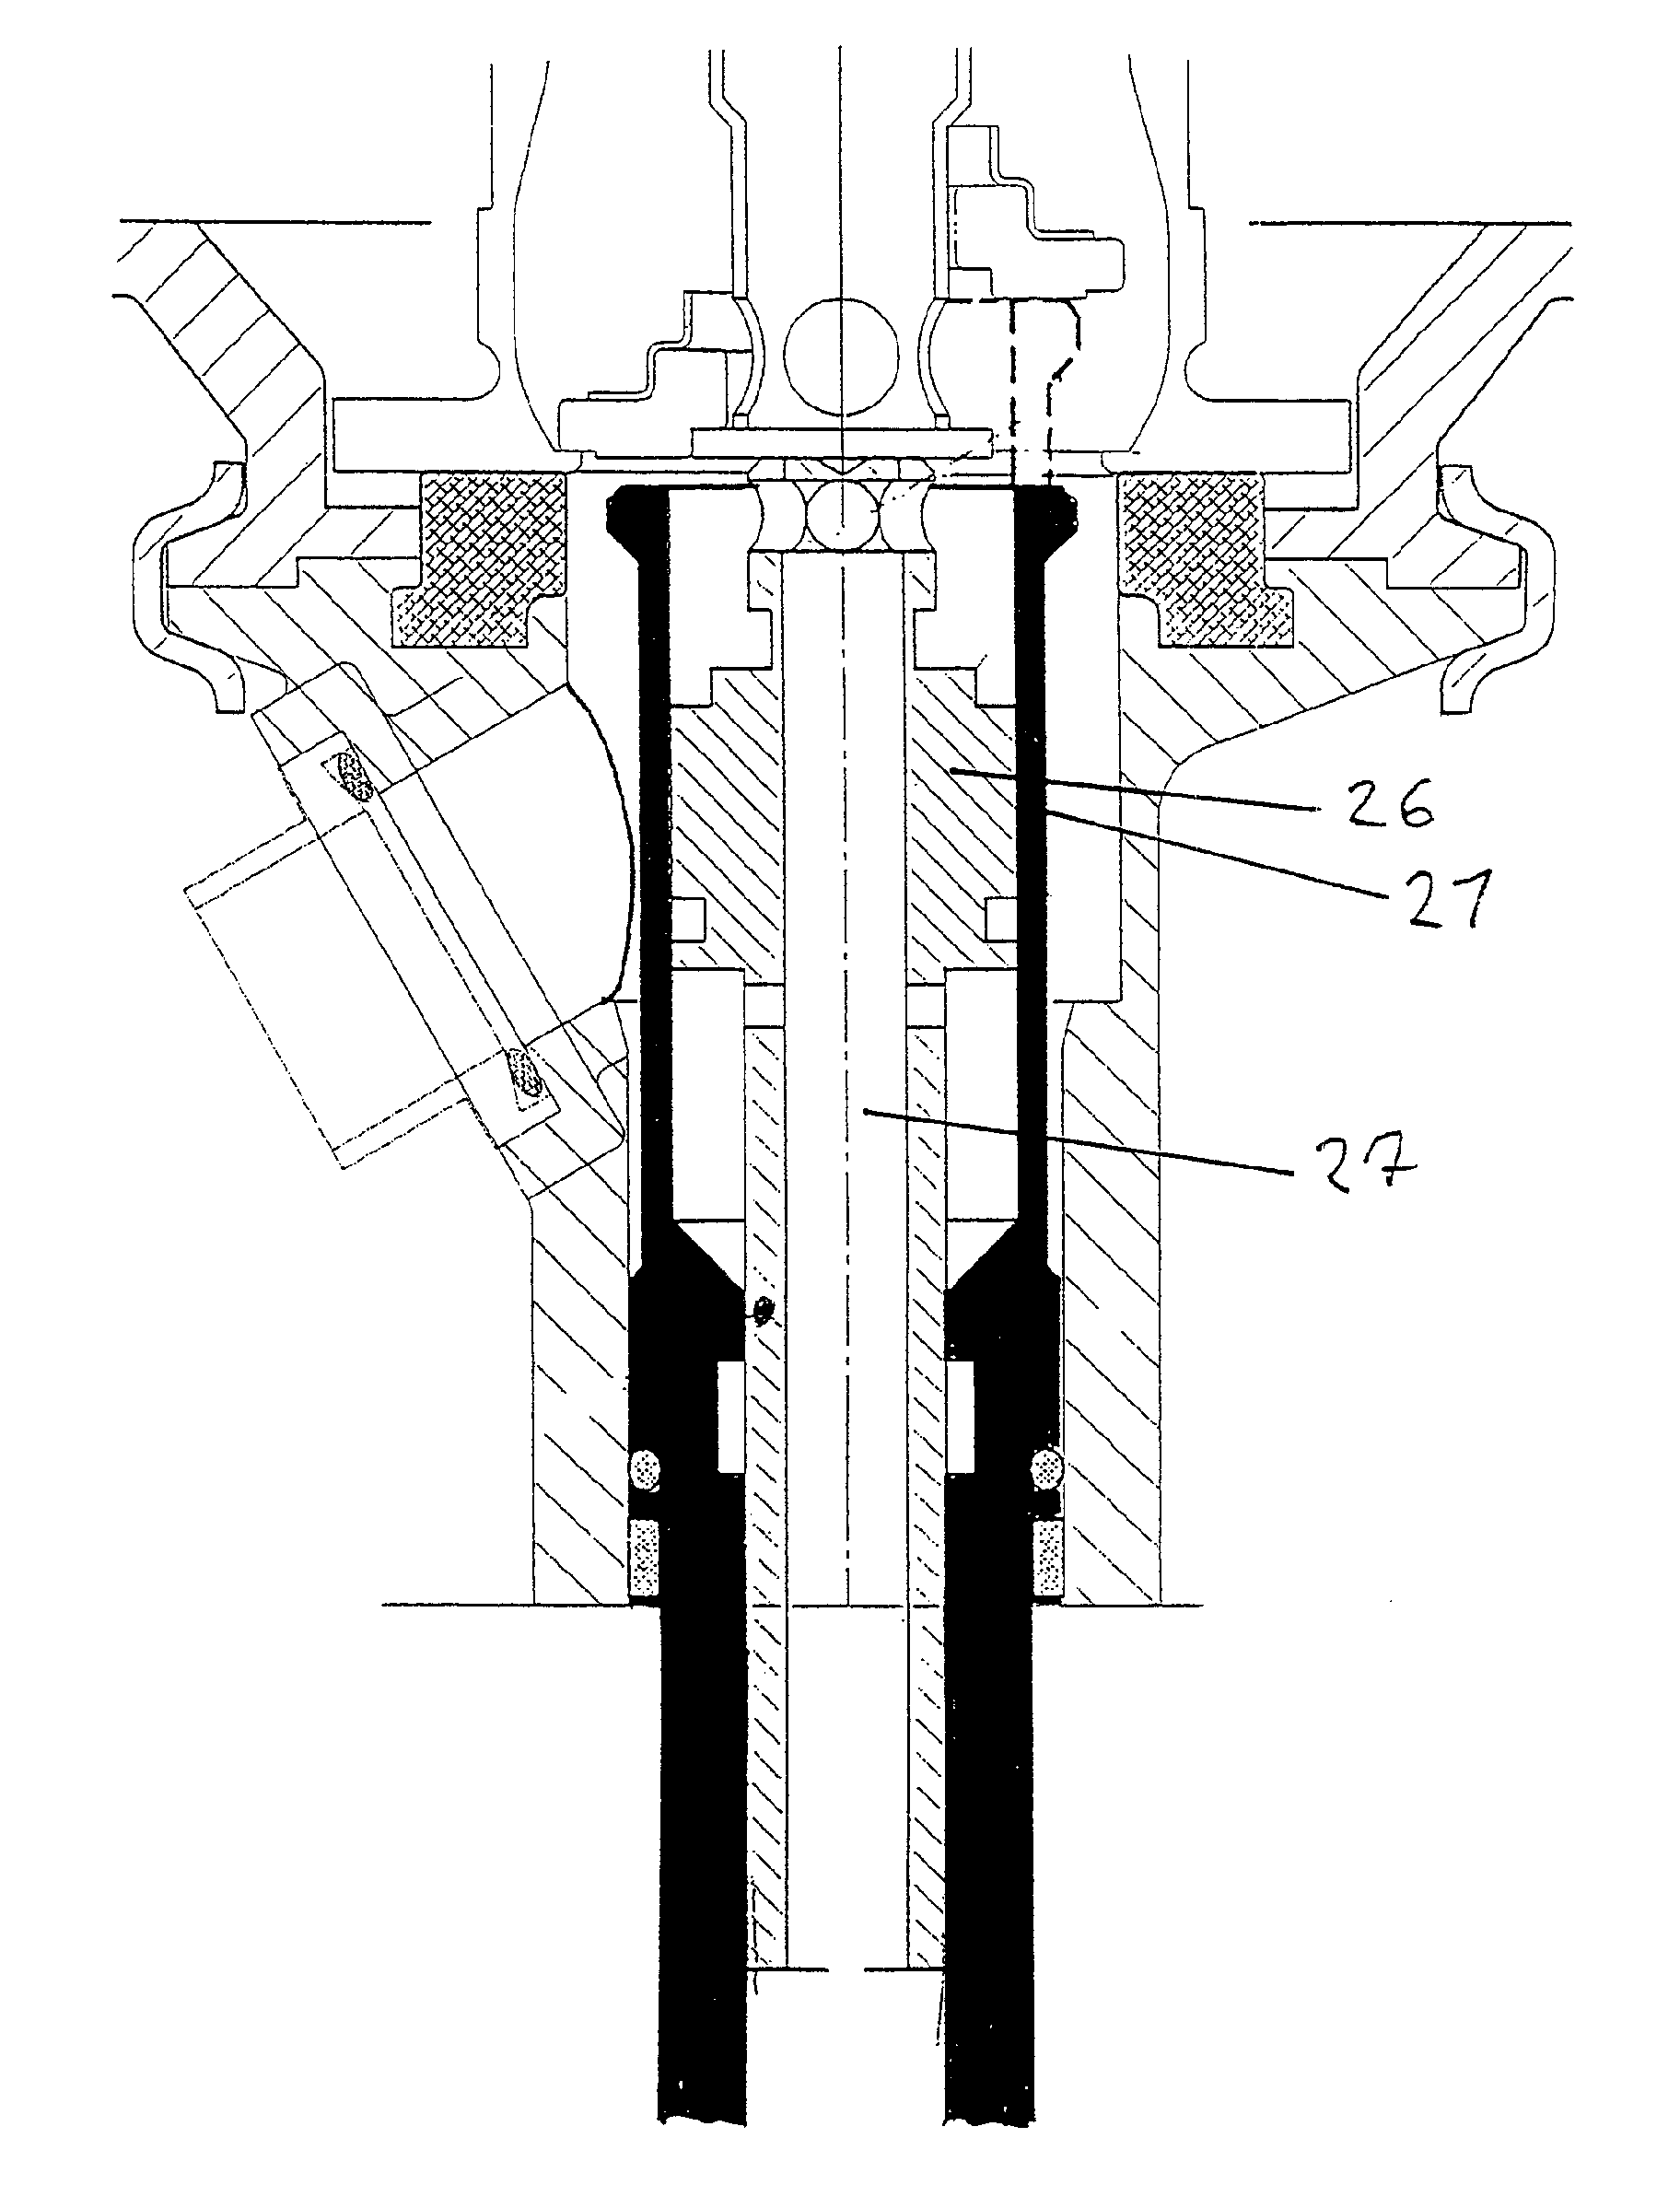 Keg filling plant for filling kegs with a liquid beverage material, such as beer, wine, soft drinks, or juice, and a method of operating same, and a handling and treatment station for kegs